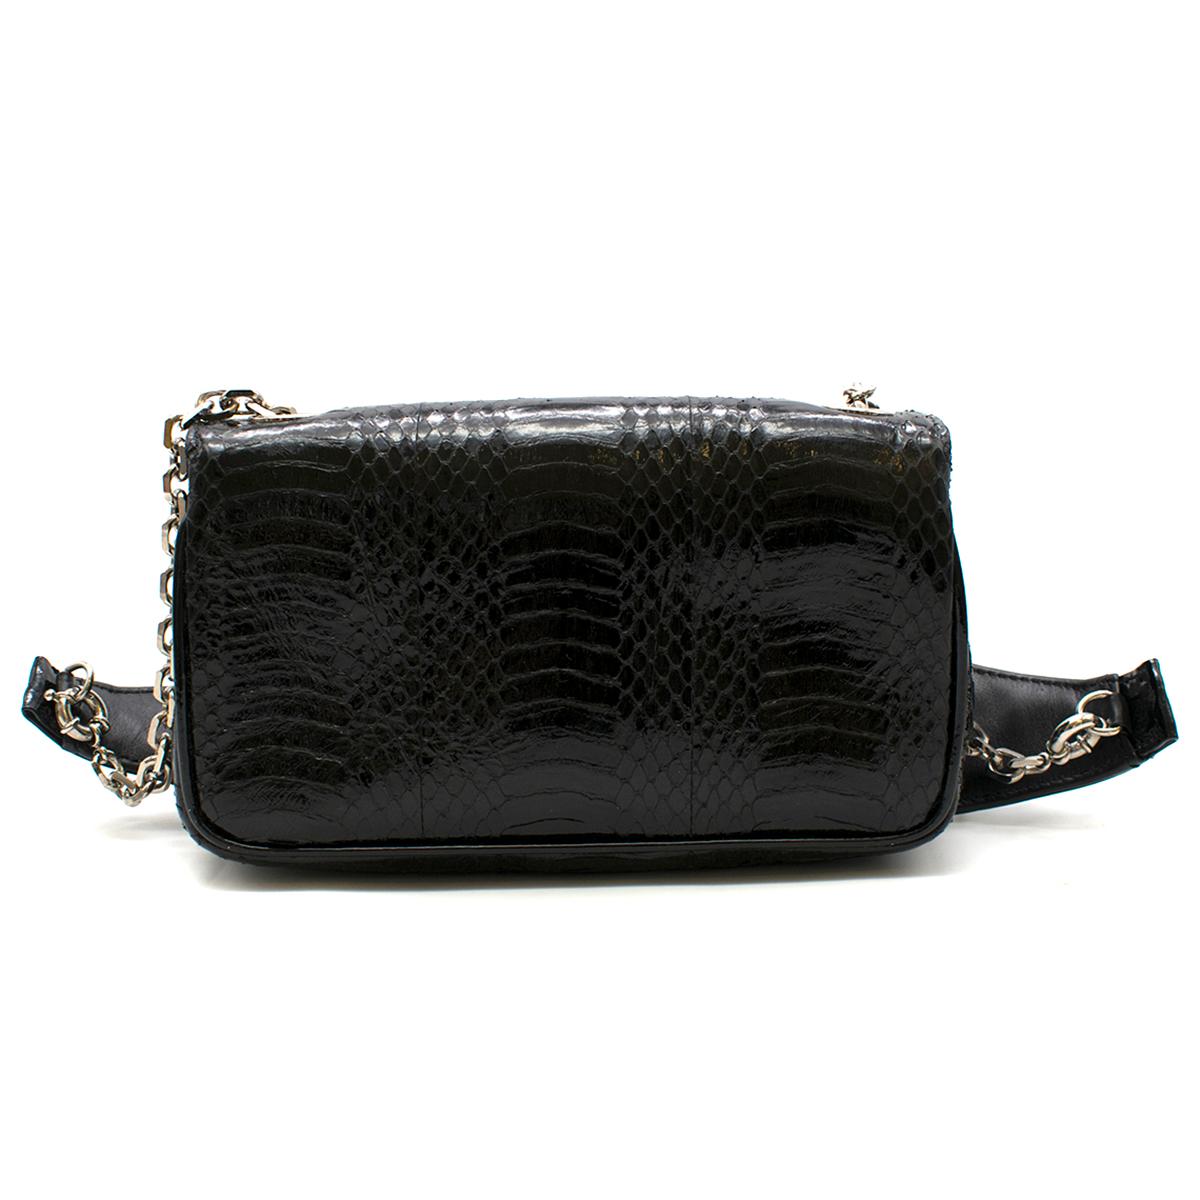 black louboutin bag with spikes